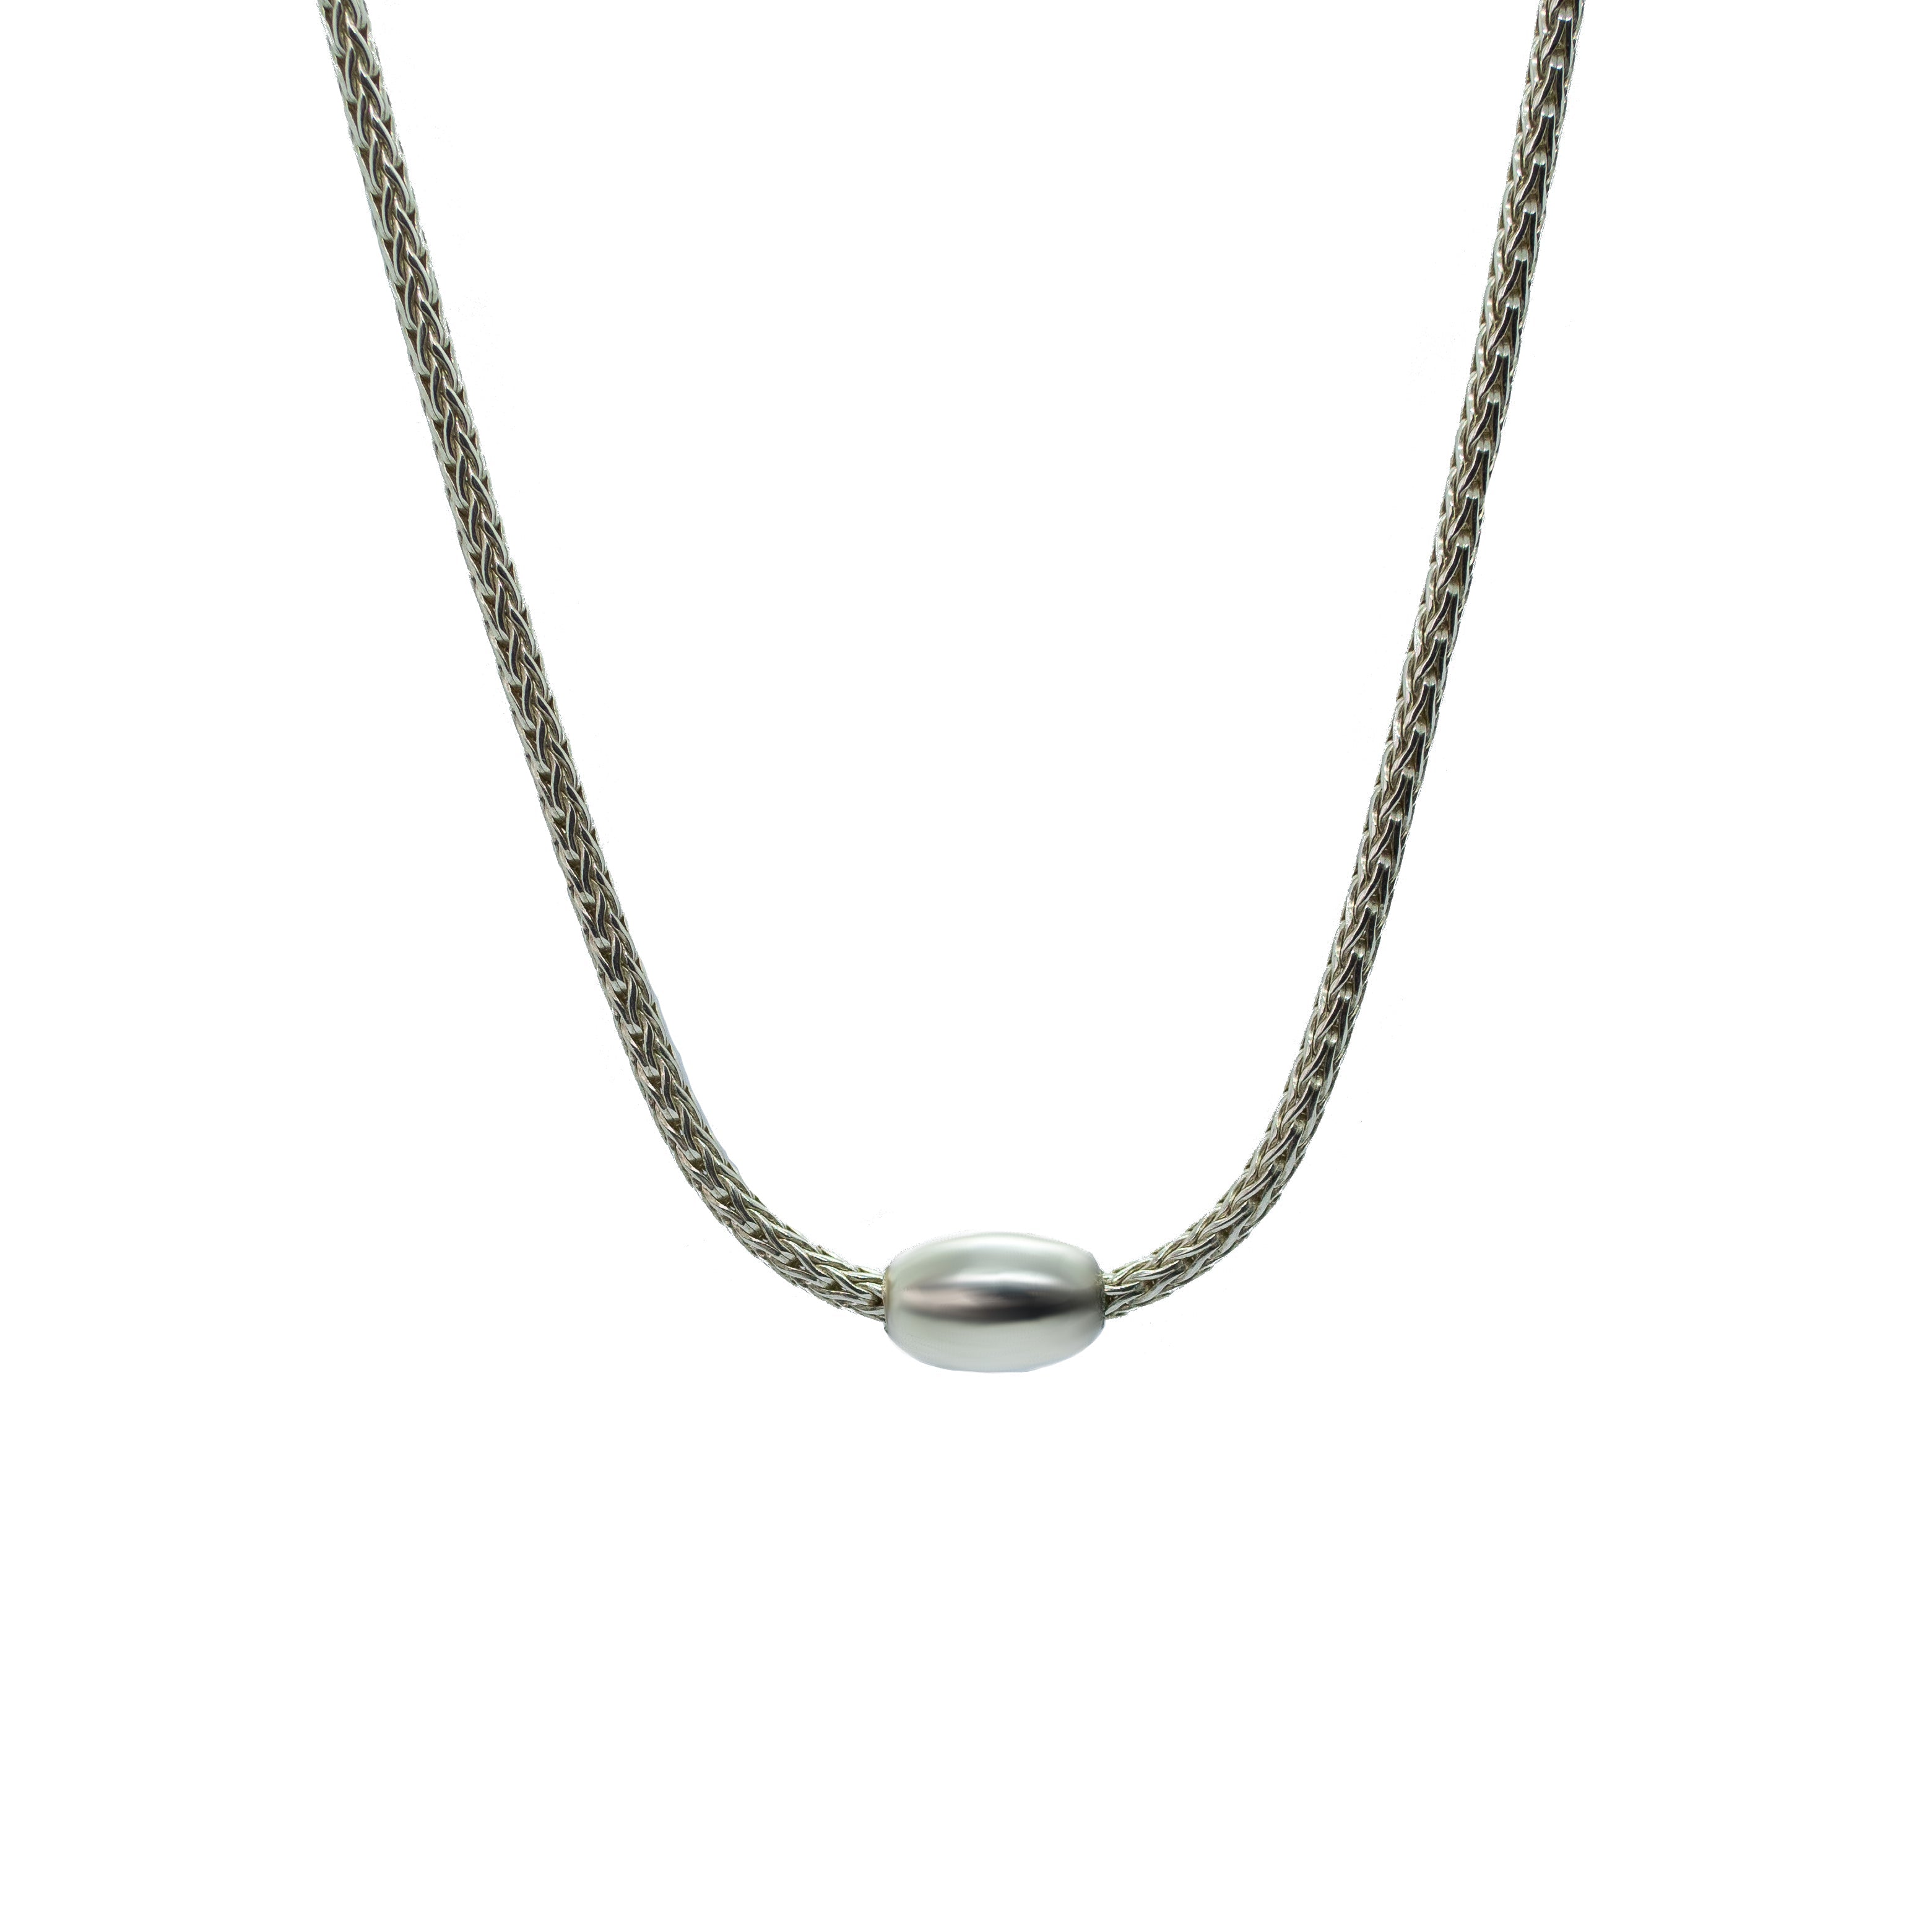 Token Necklace for Equanimity & Healing - Recycled Sterling Silver on Recycled Sterling Silver Chain